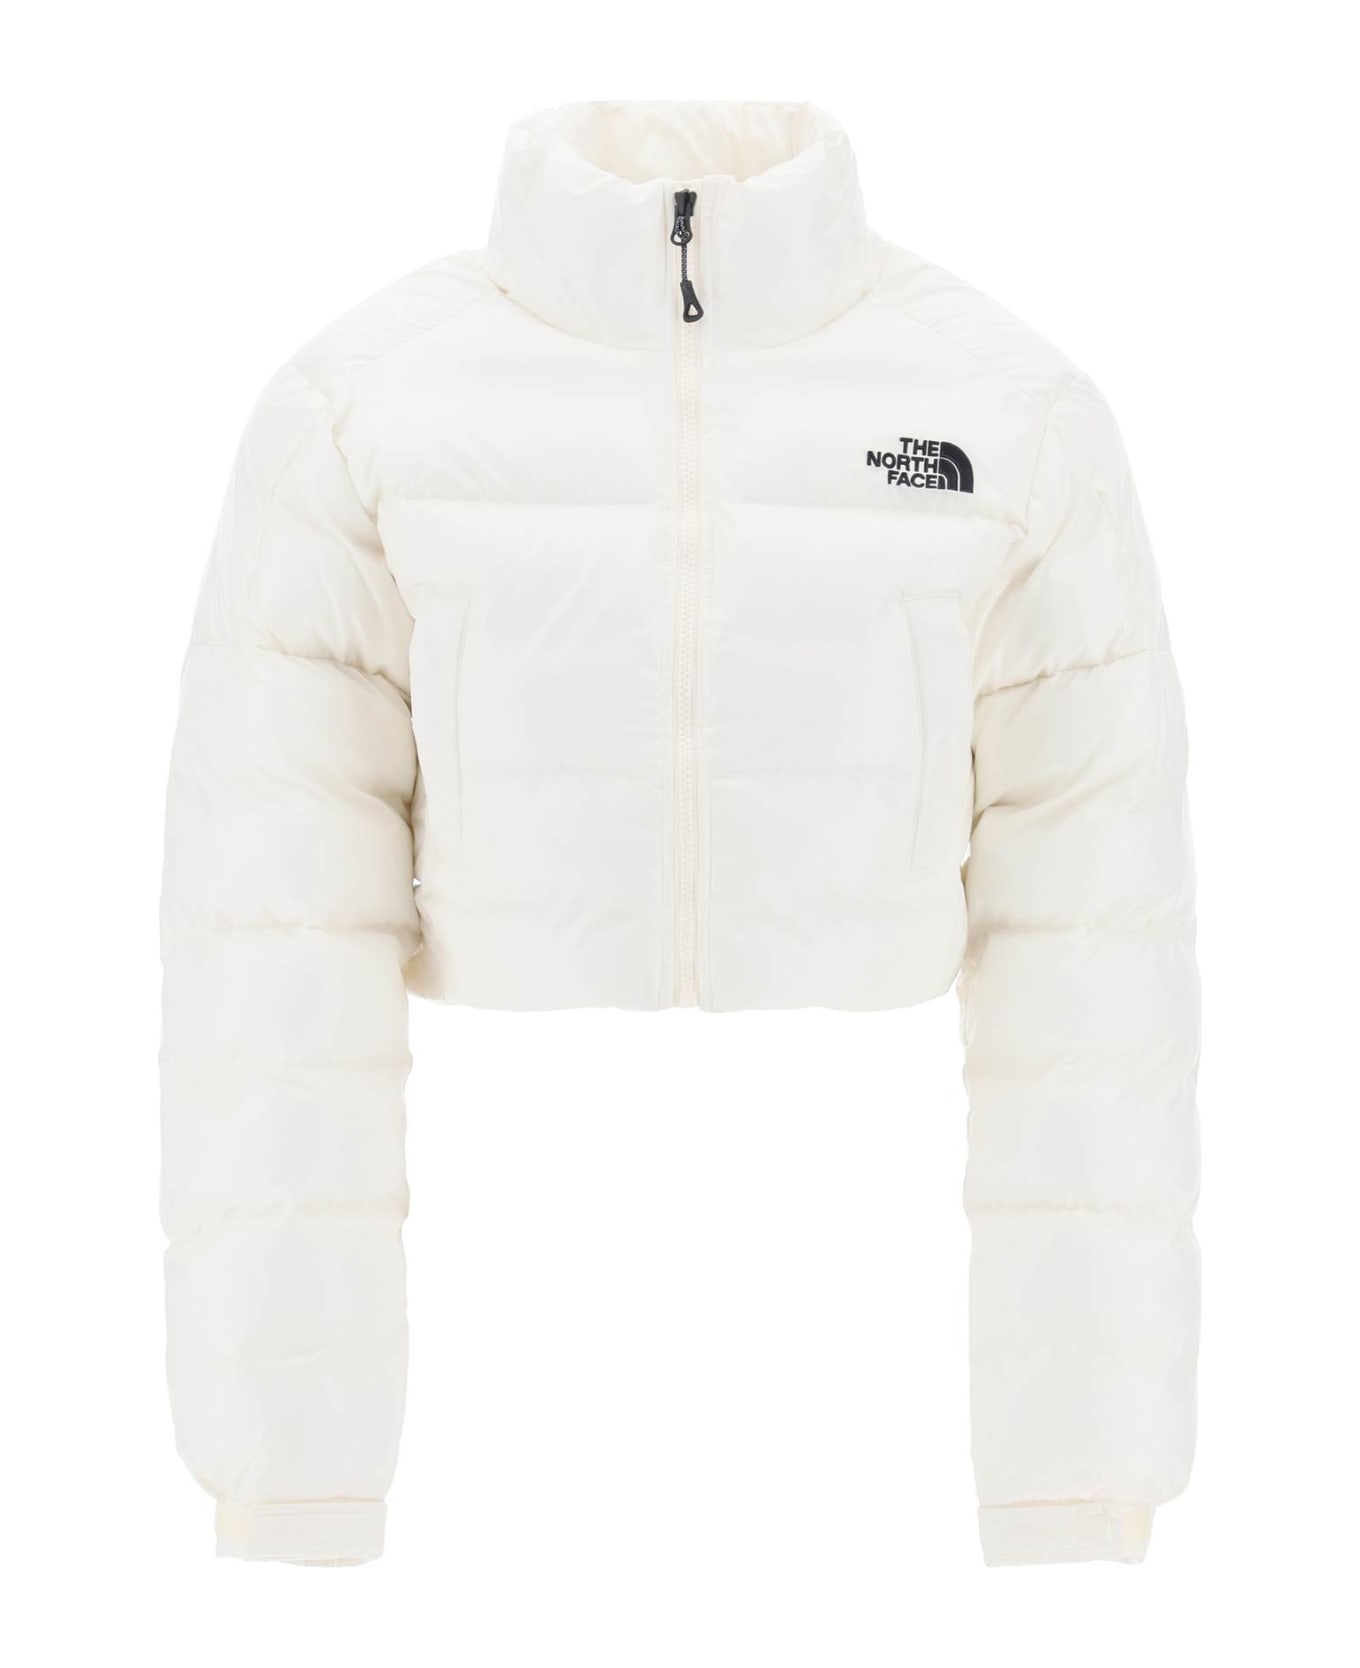 The North Face 'rusta 2.0? Cropped Puffer Jacket - WHITE DUNE (White)